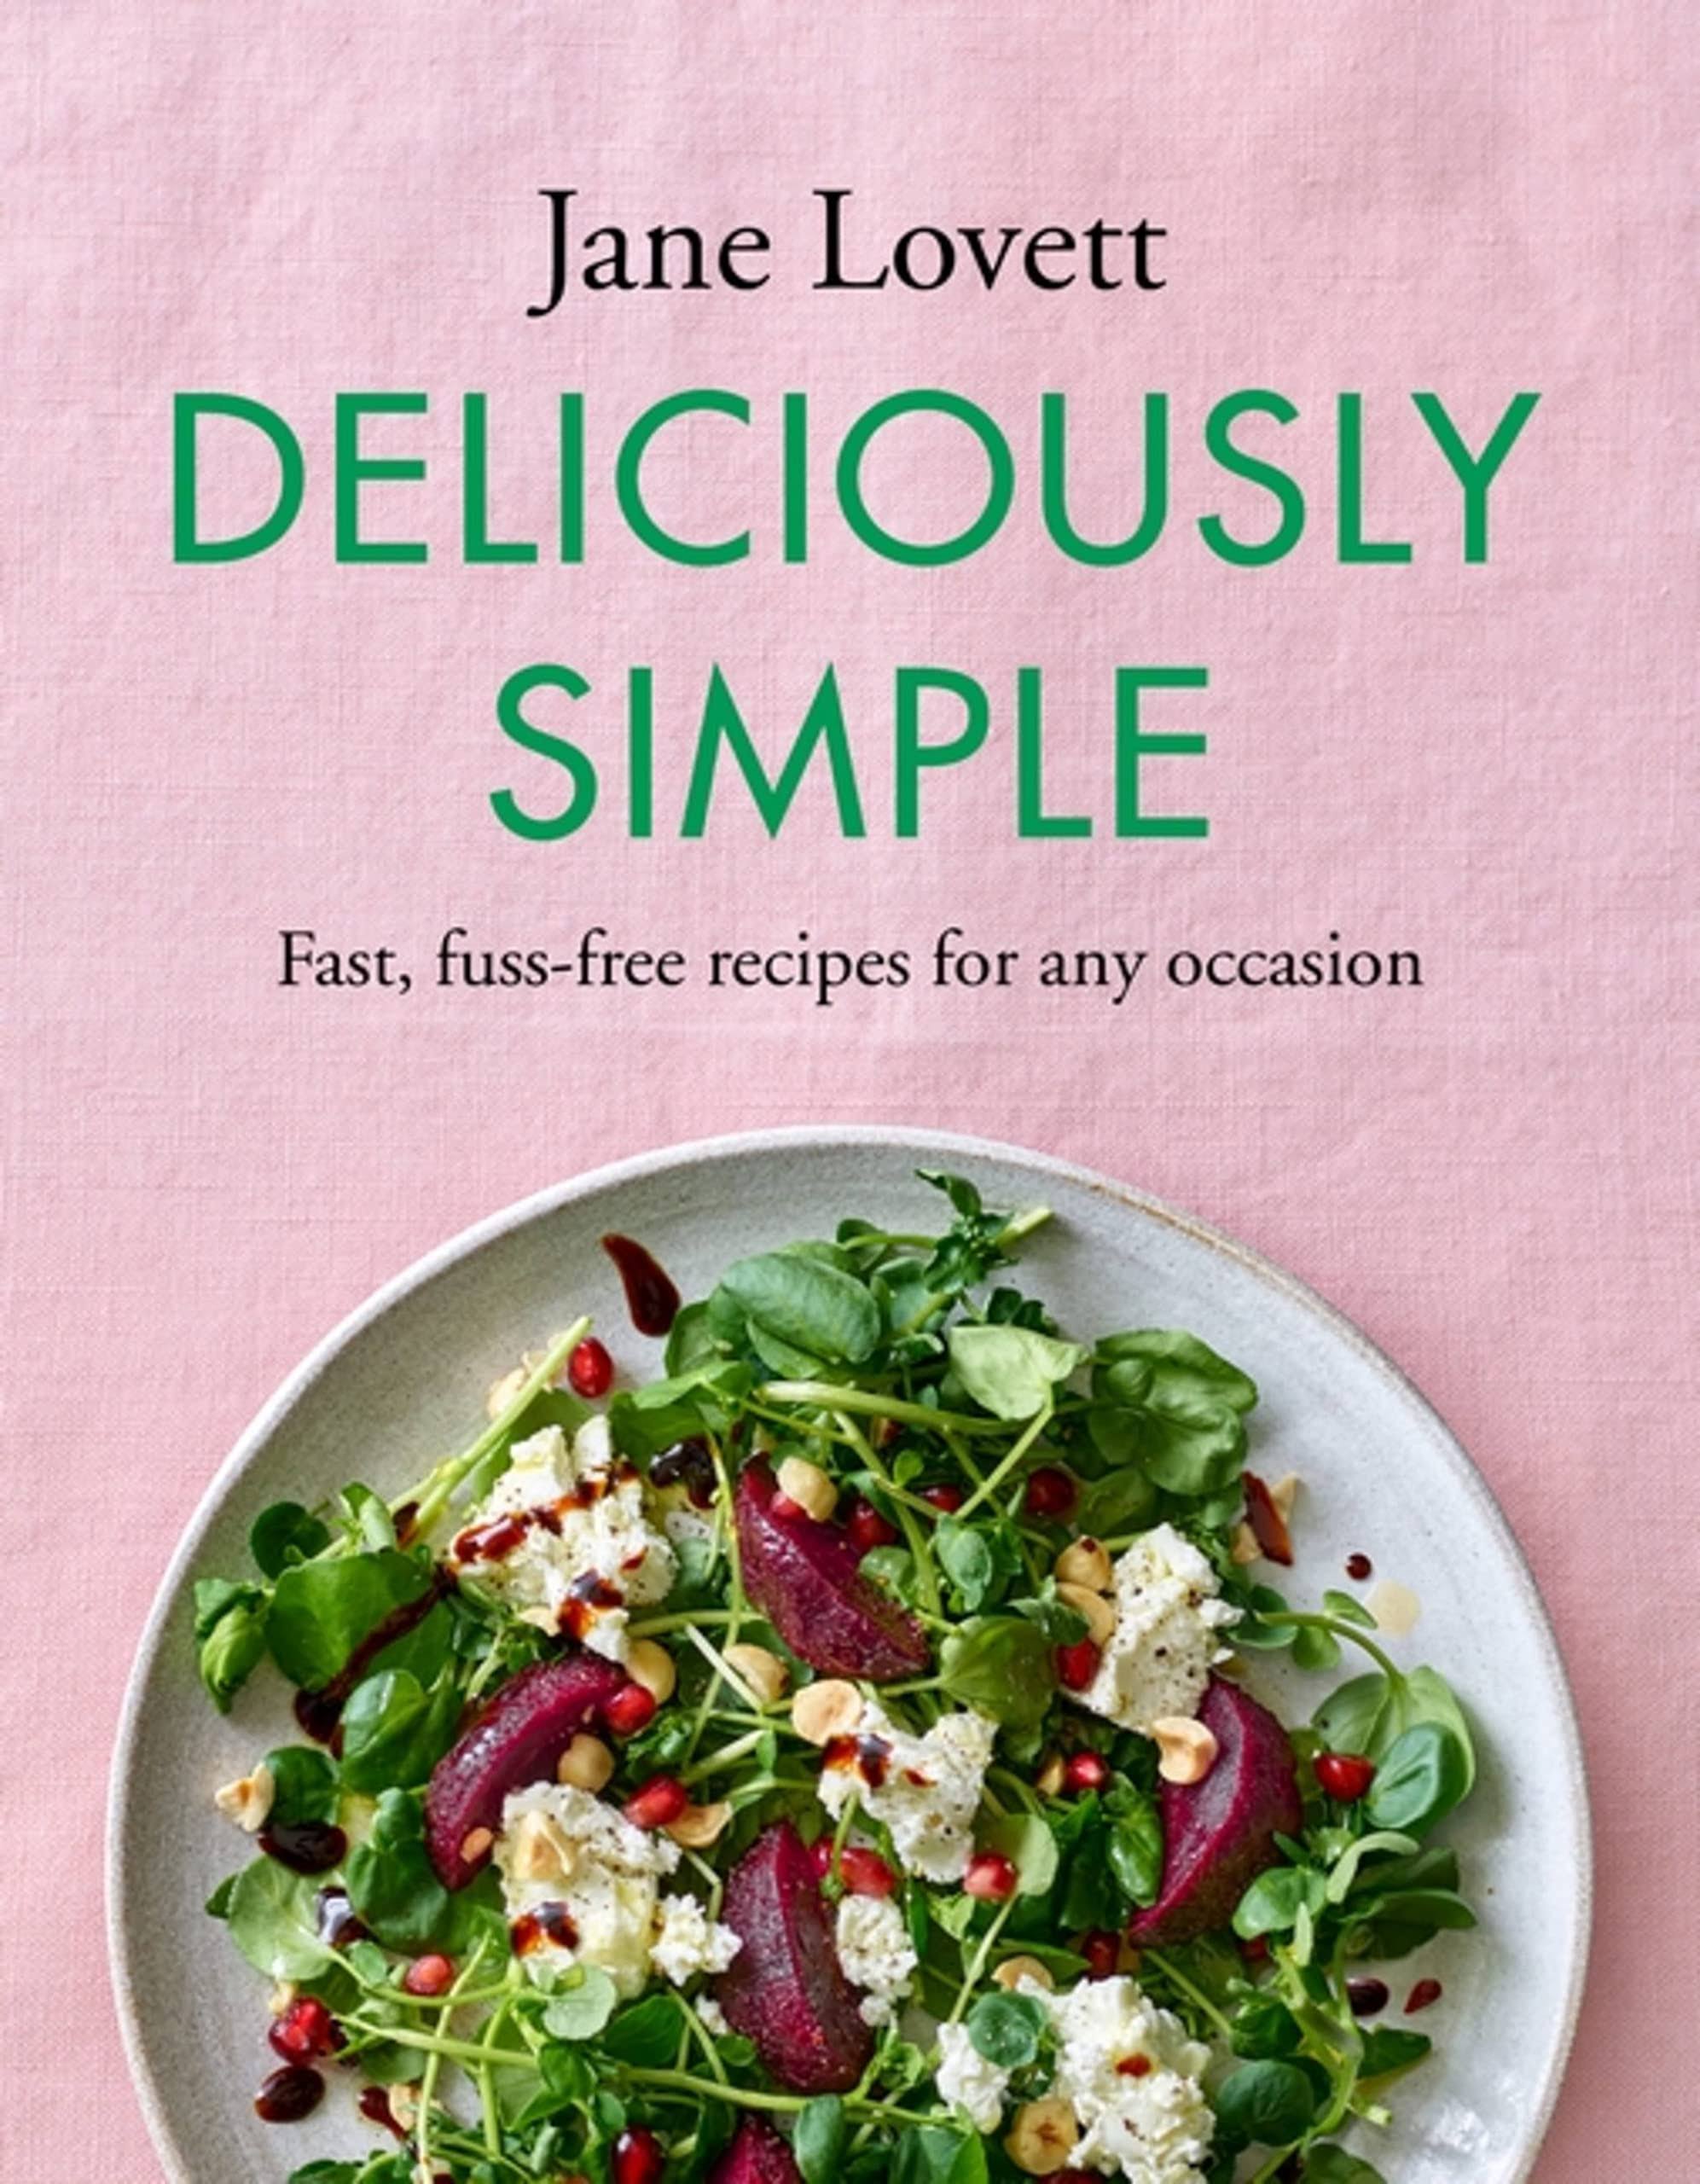 Deliciously Simple: Fast, Fuss-Free Recipes for Any Occasion [Book]